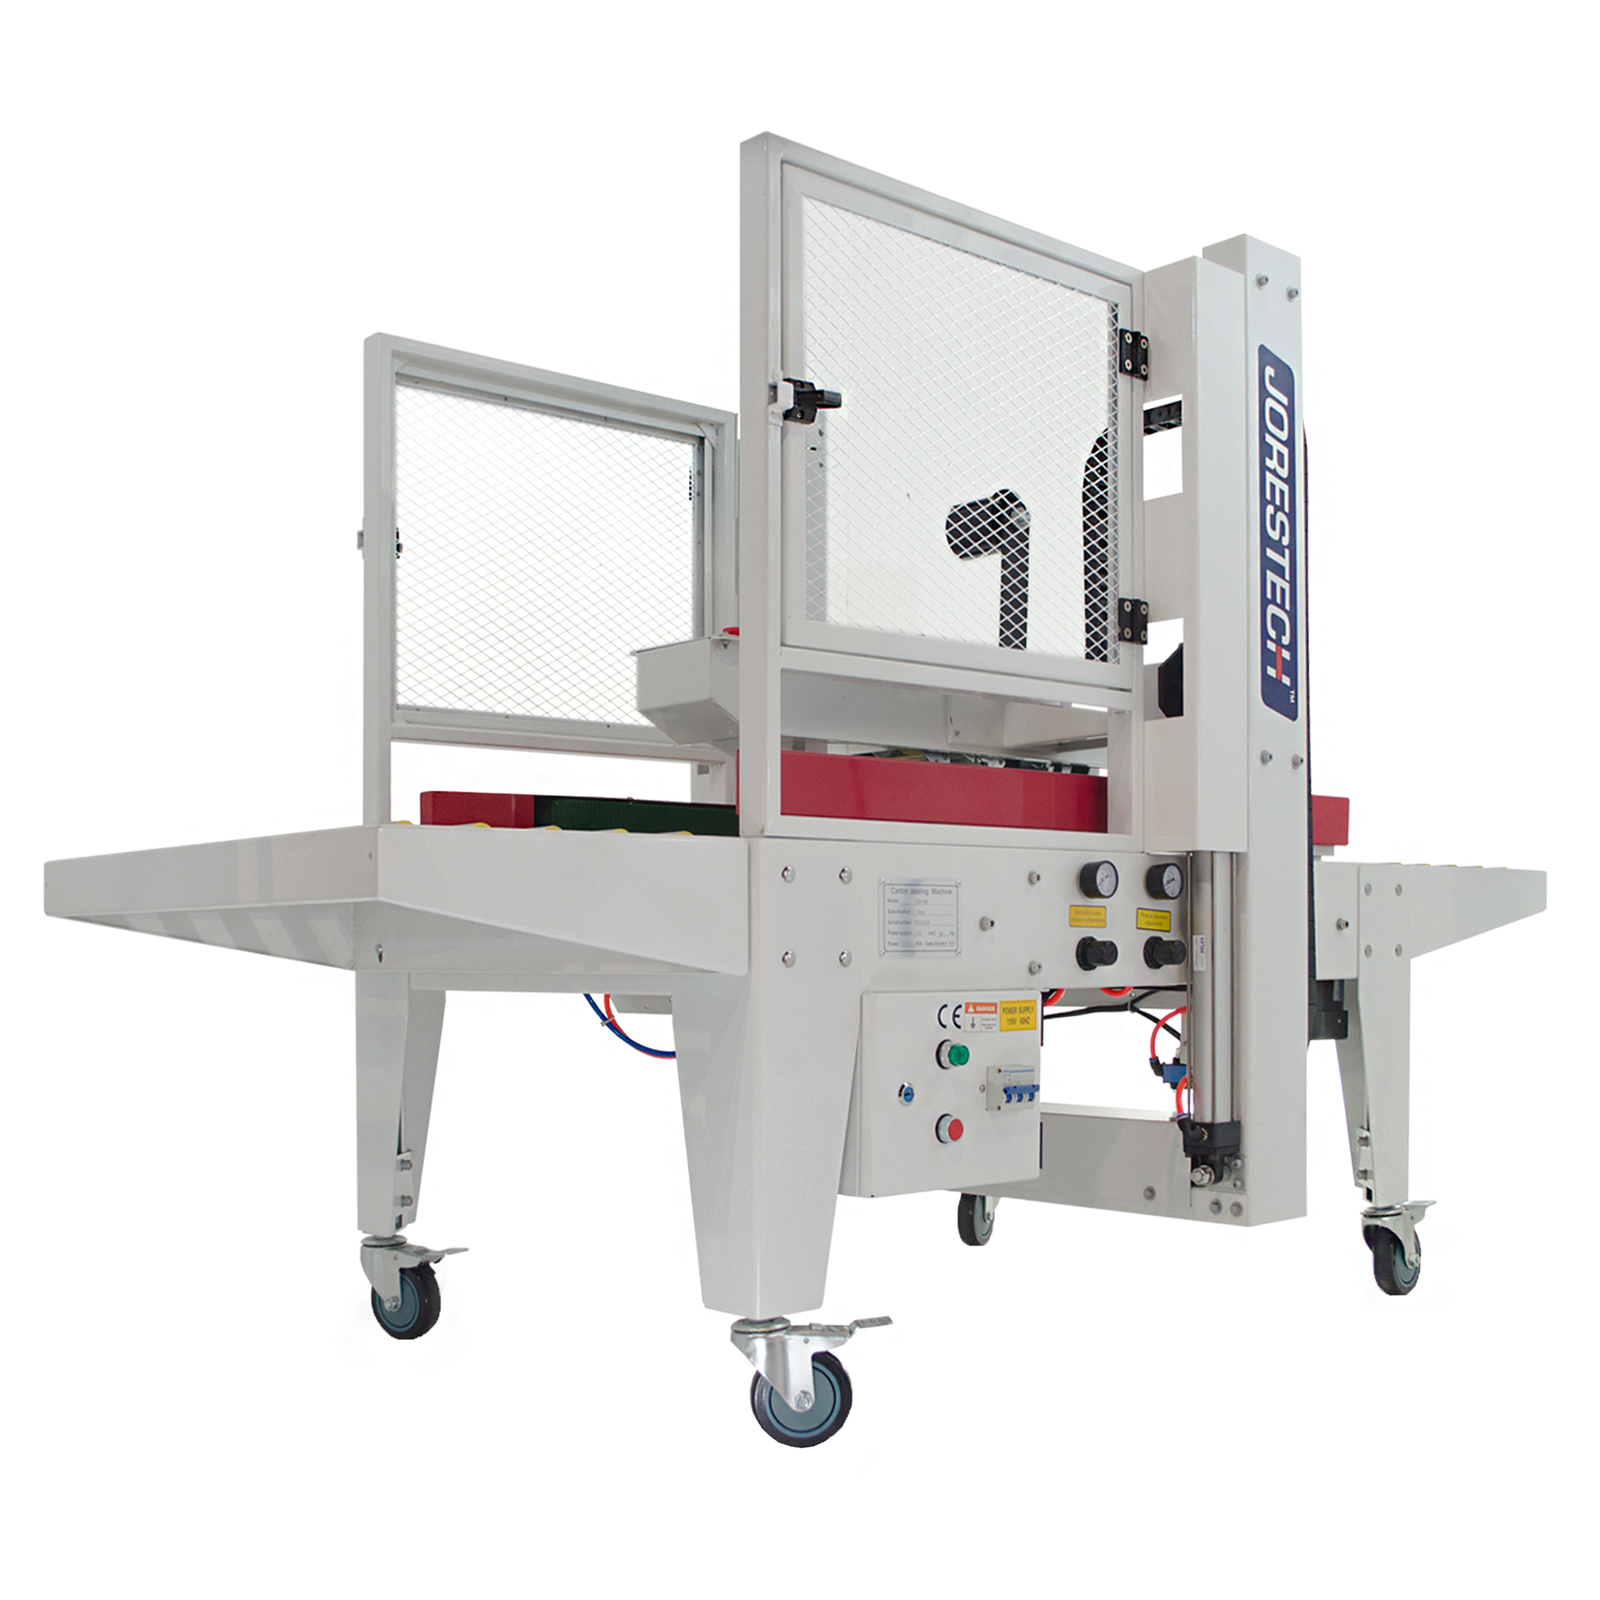 White case sealer machine with red side traction bars and JORES TECHNOLOGIES® logo on the side